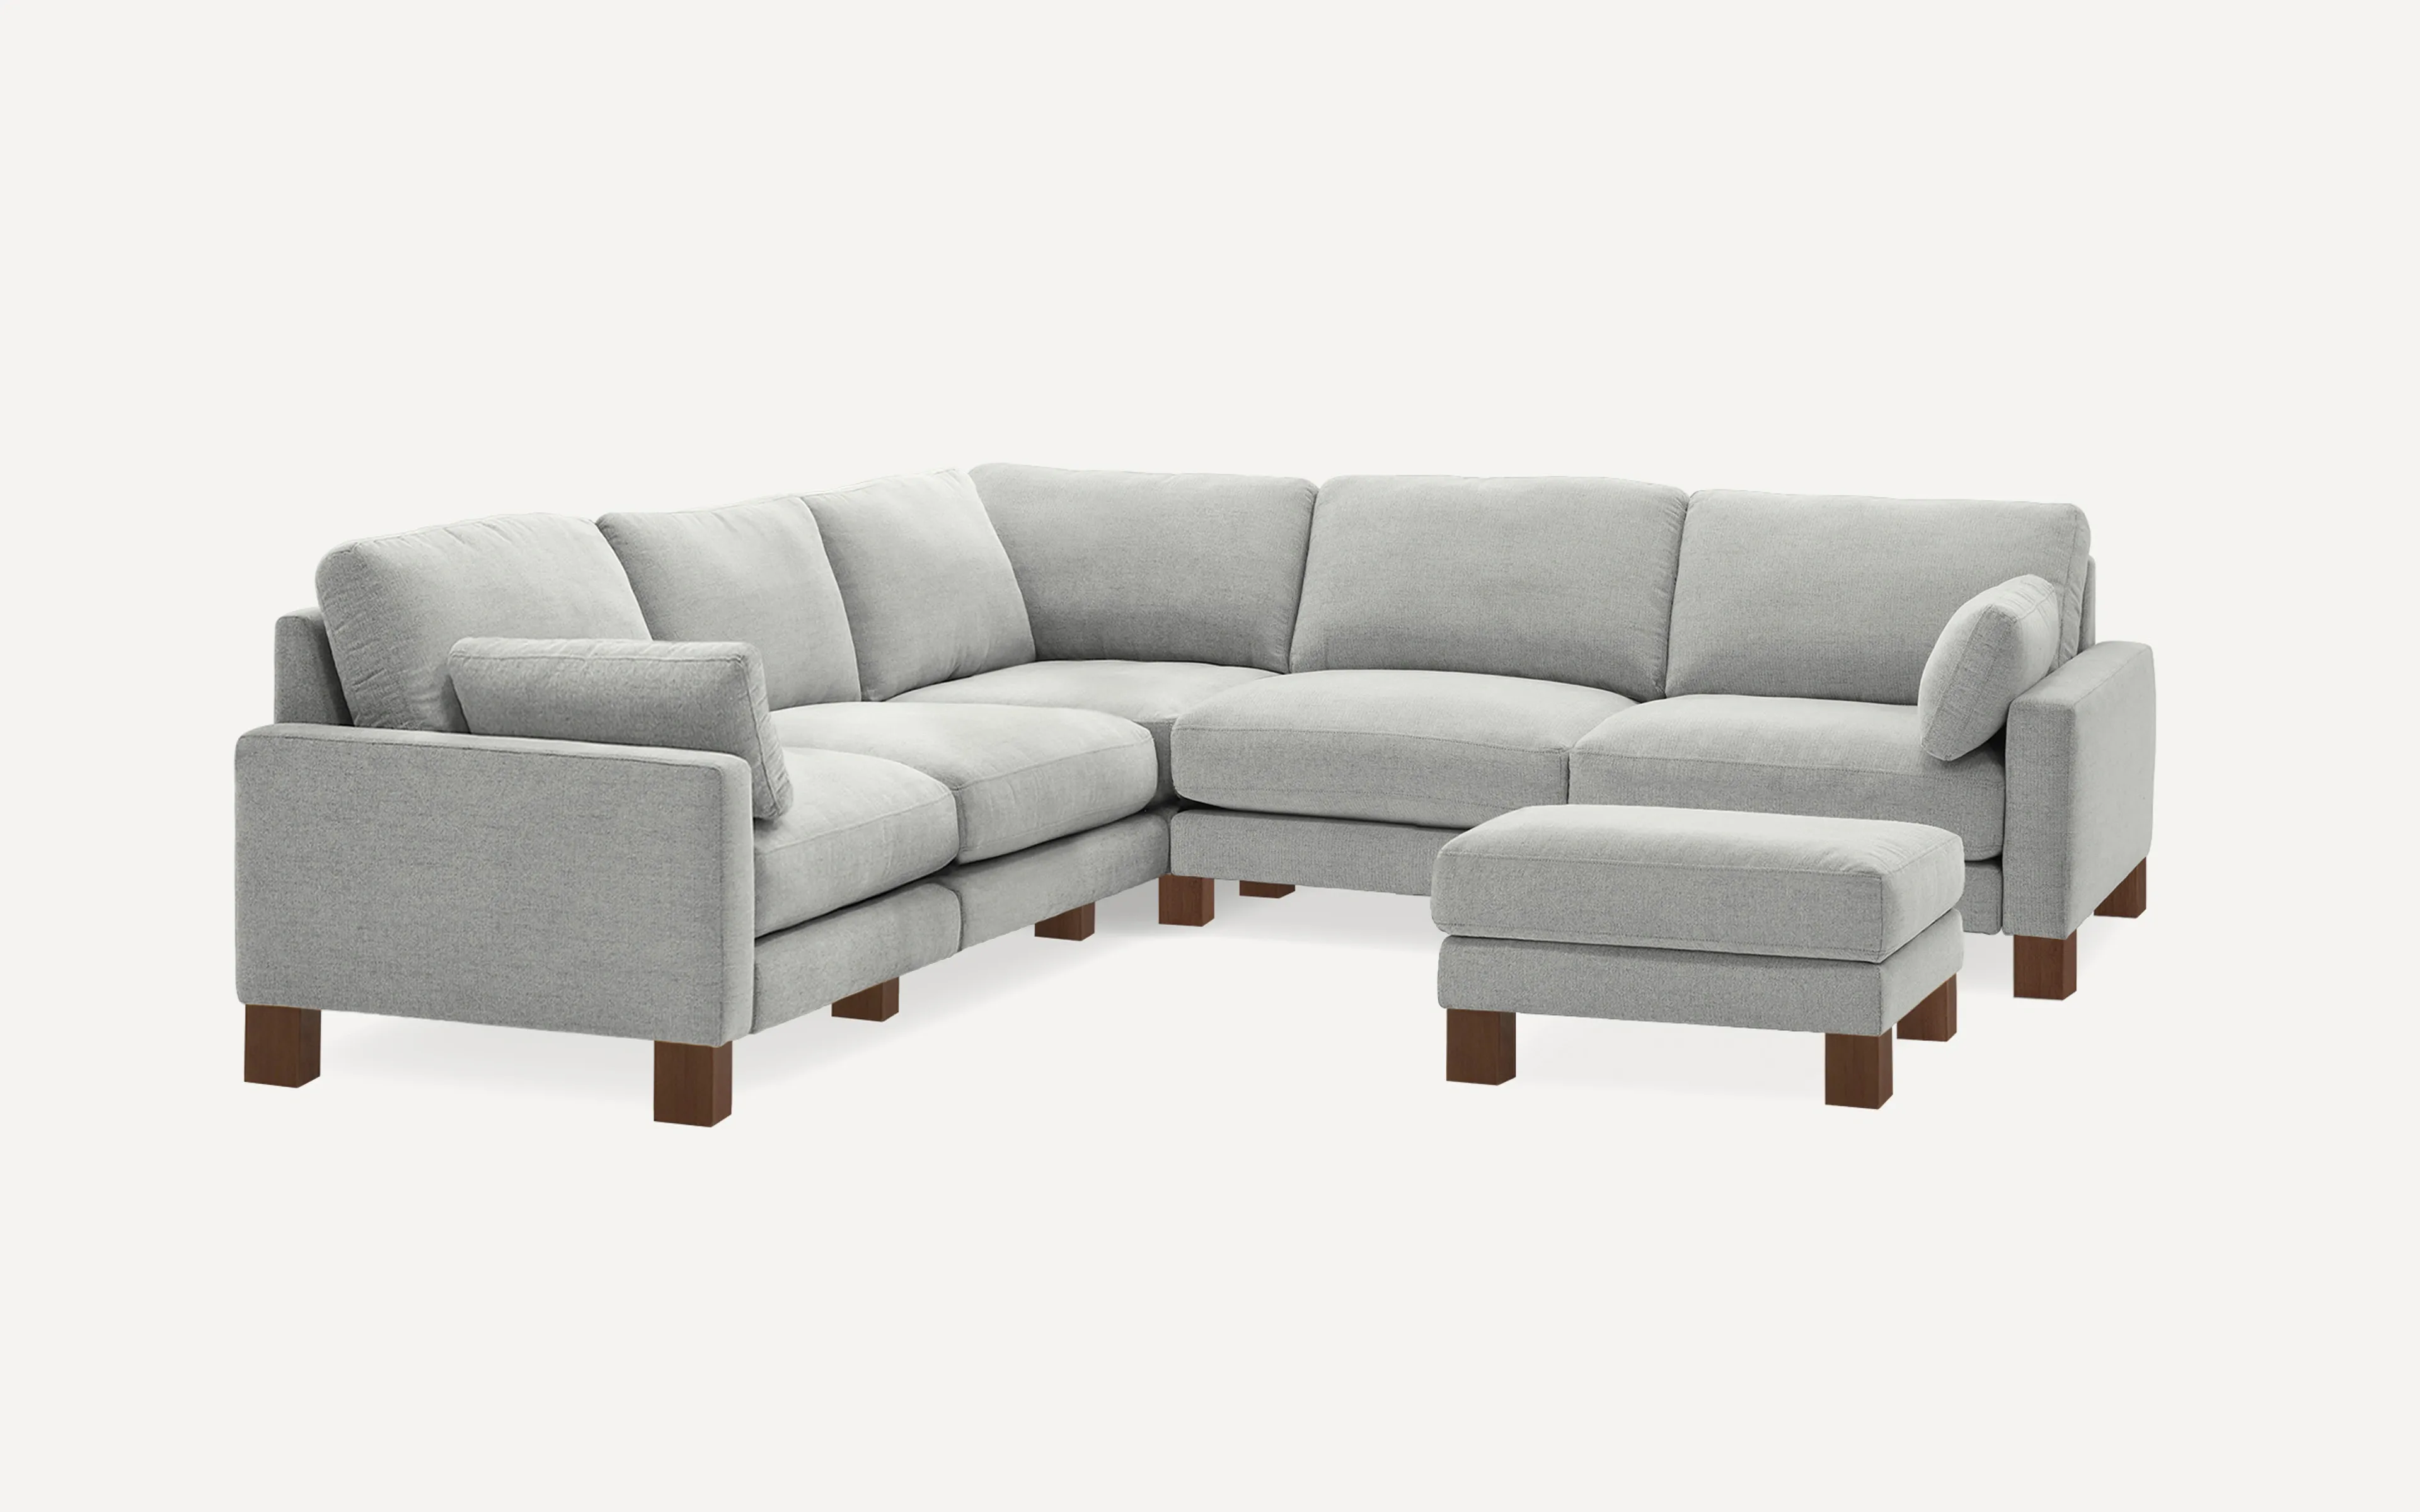 Union 5-Seat Sectional